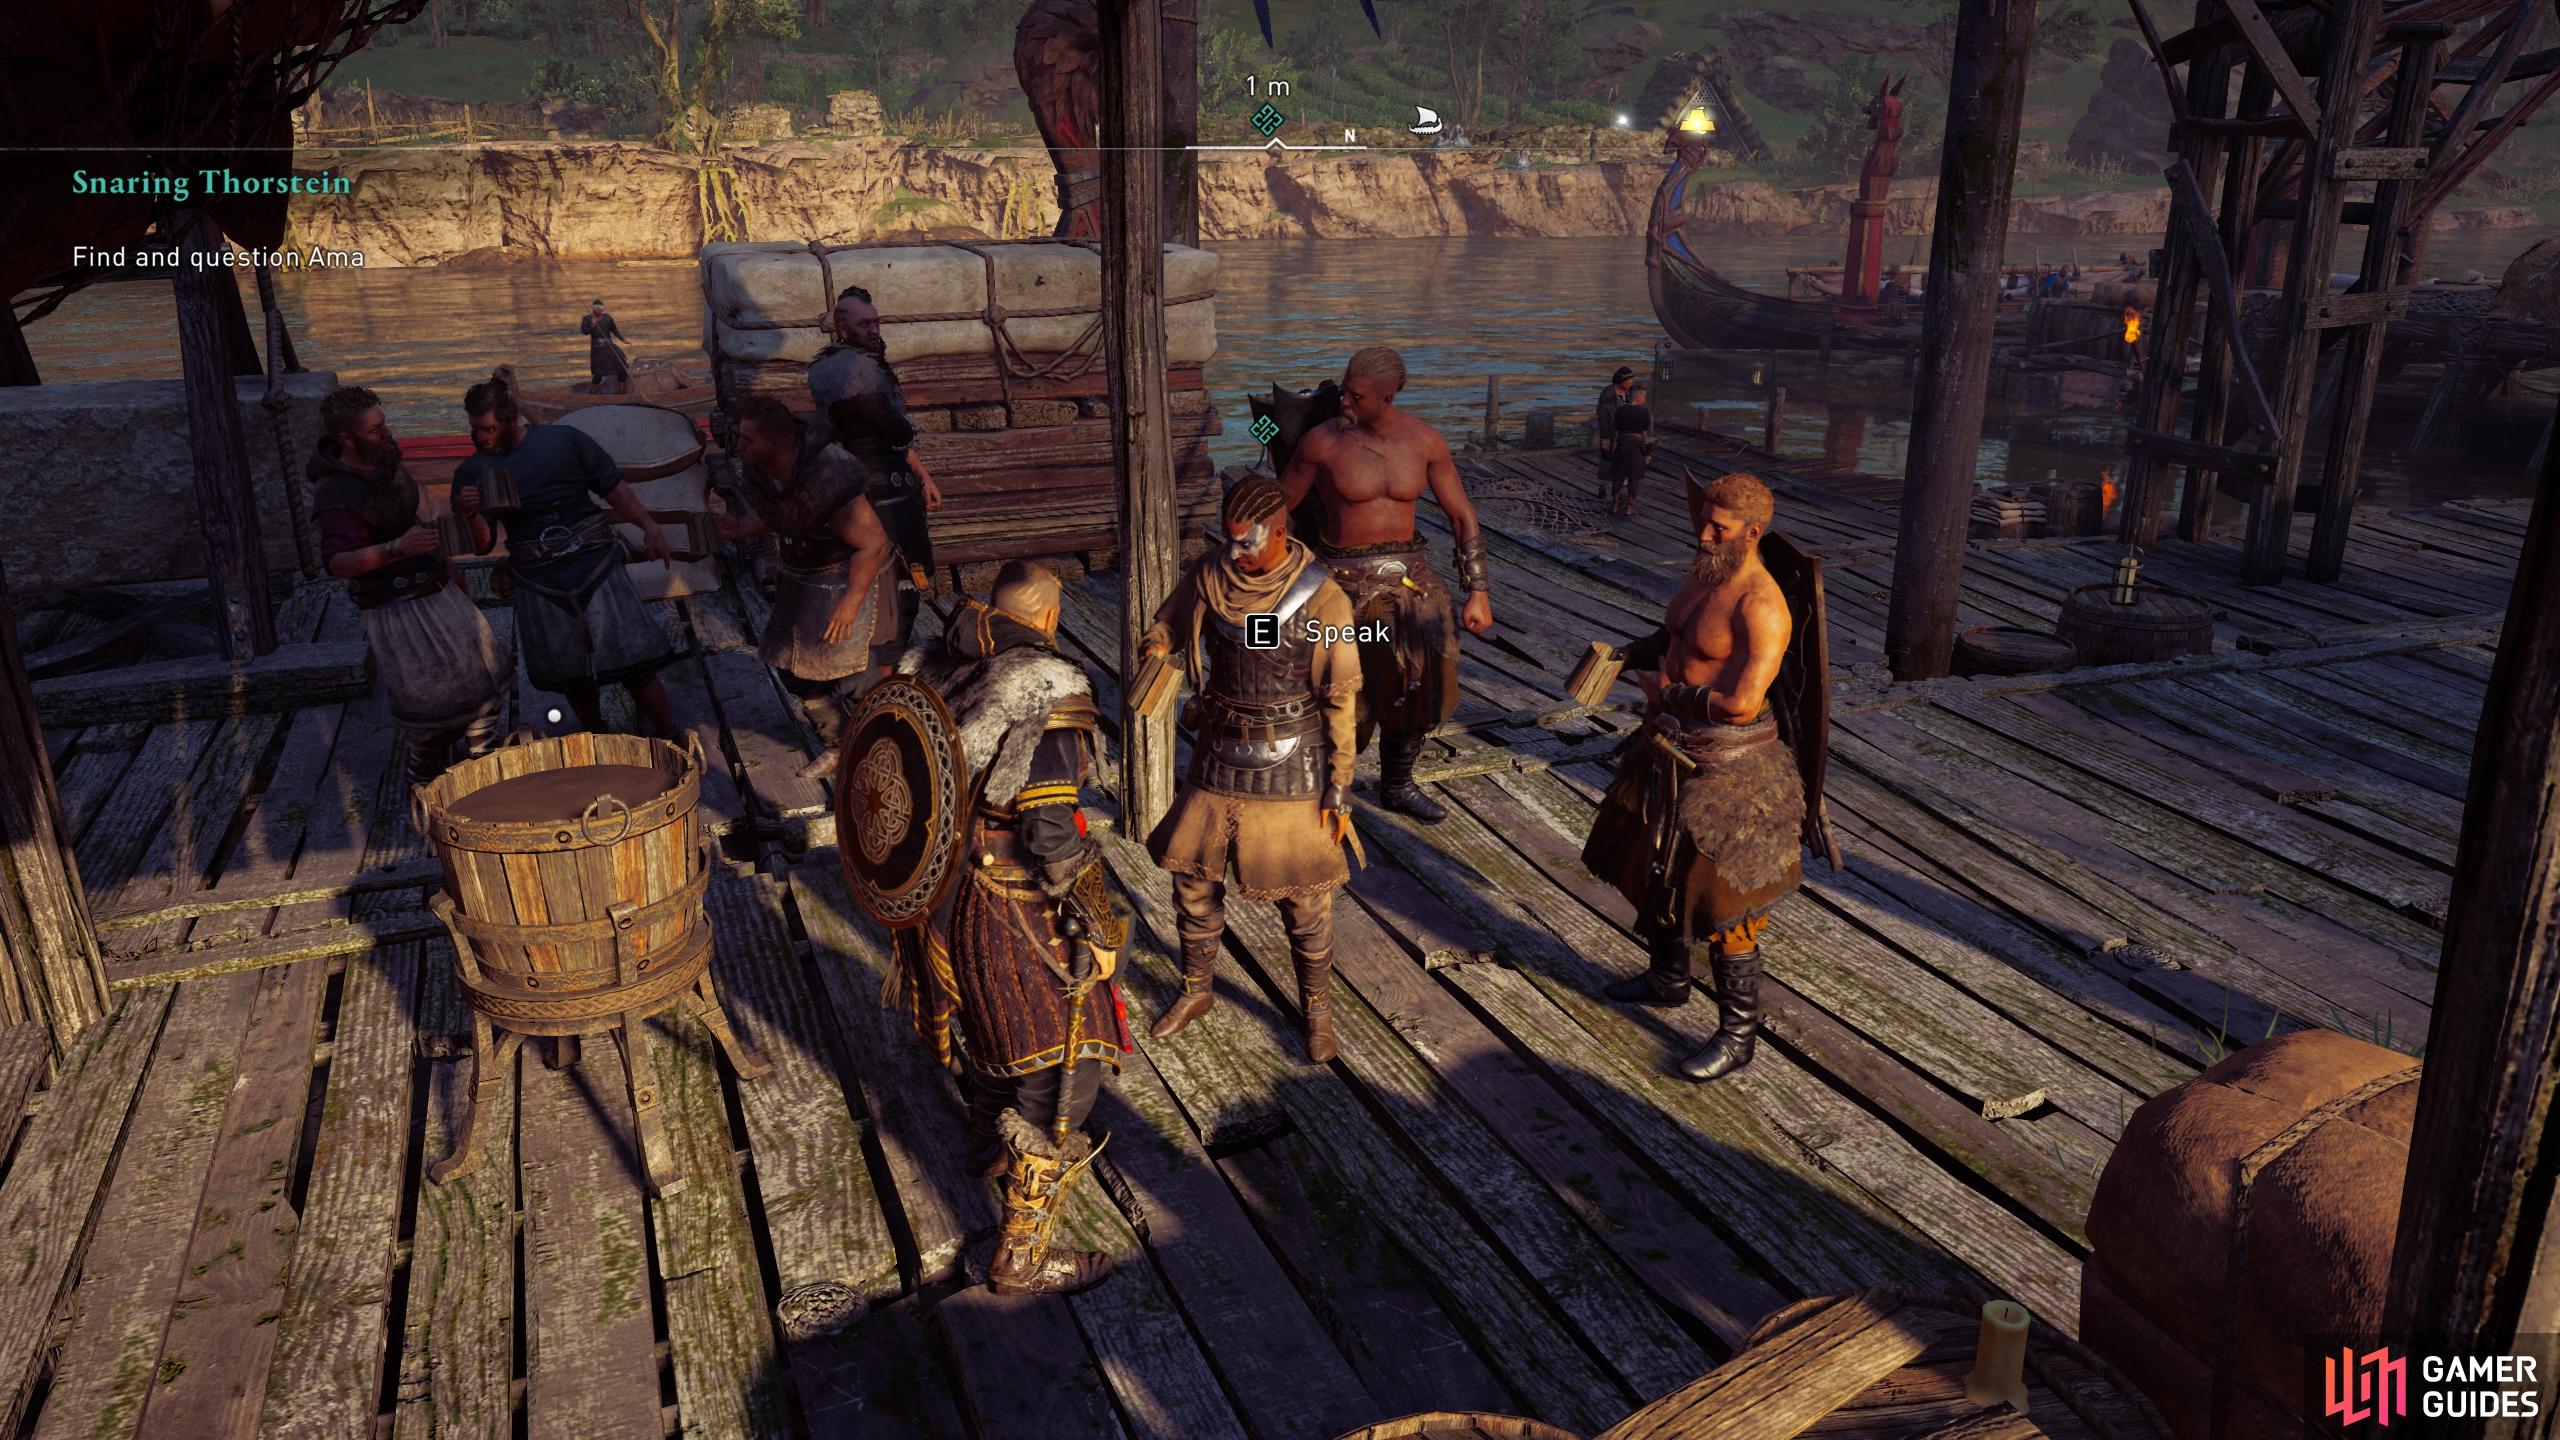 Speak with Ama at the docks to begin a drinking contest.